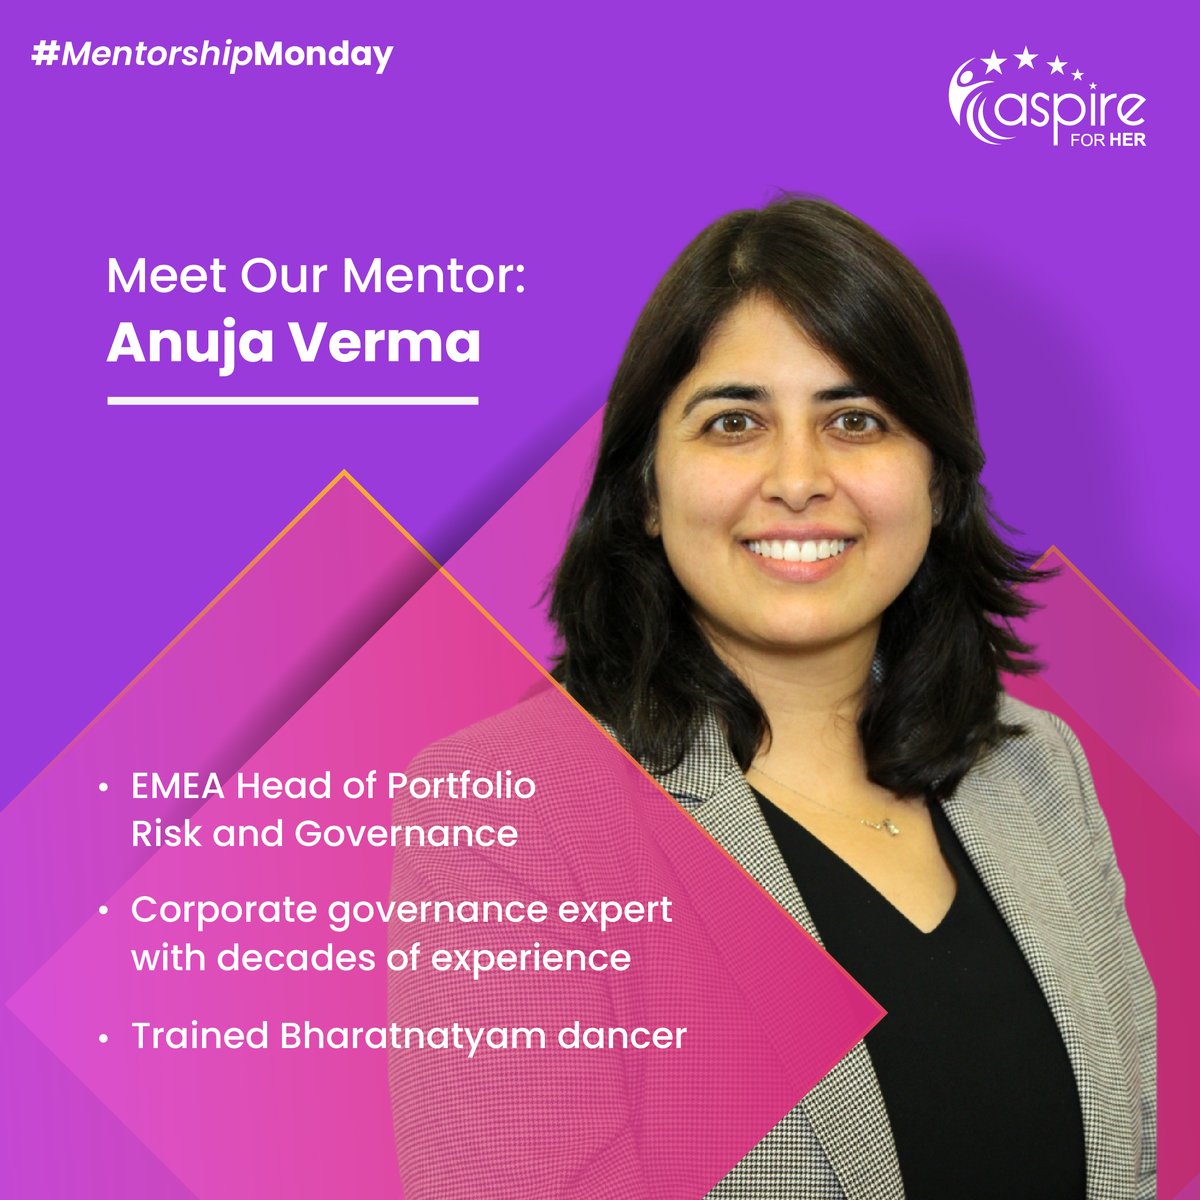 Anuja Verma's risk management experience has enabled her to delve into the intricacies of corporate governance. Having coached leaders in her firm, she now brings her knowledge to you. This #MentorshipMonday, book a free session with her. aspireforher.com/mentorship-for…